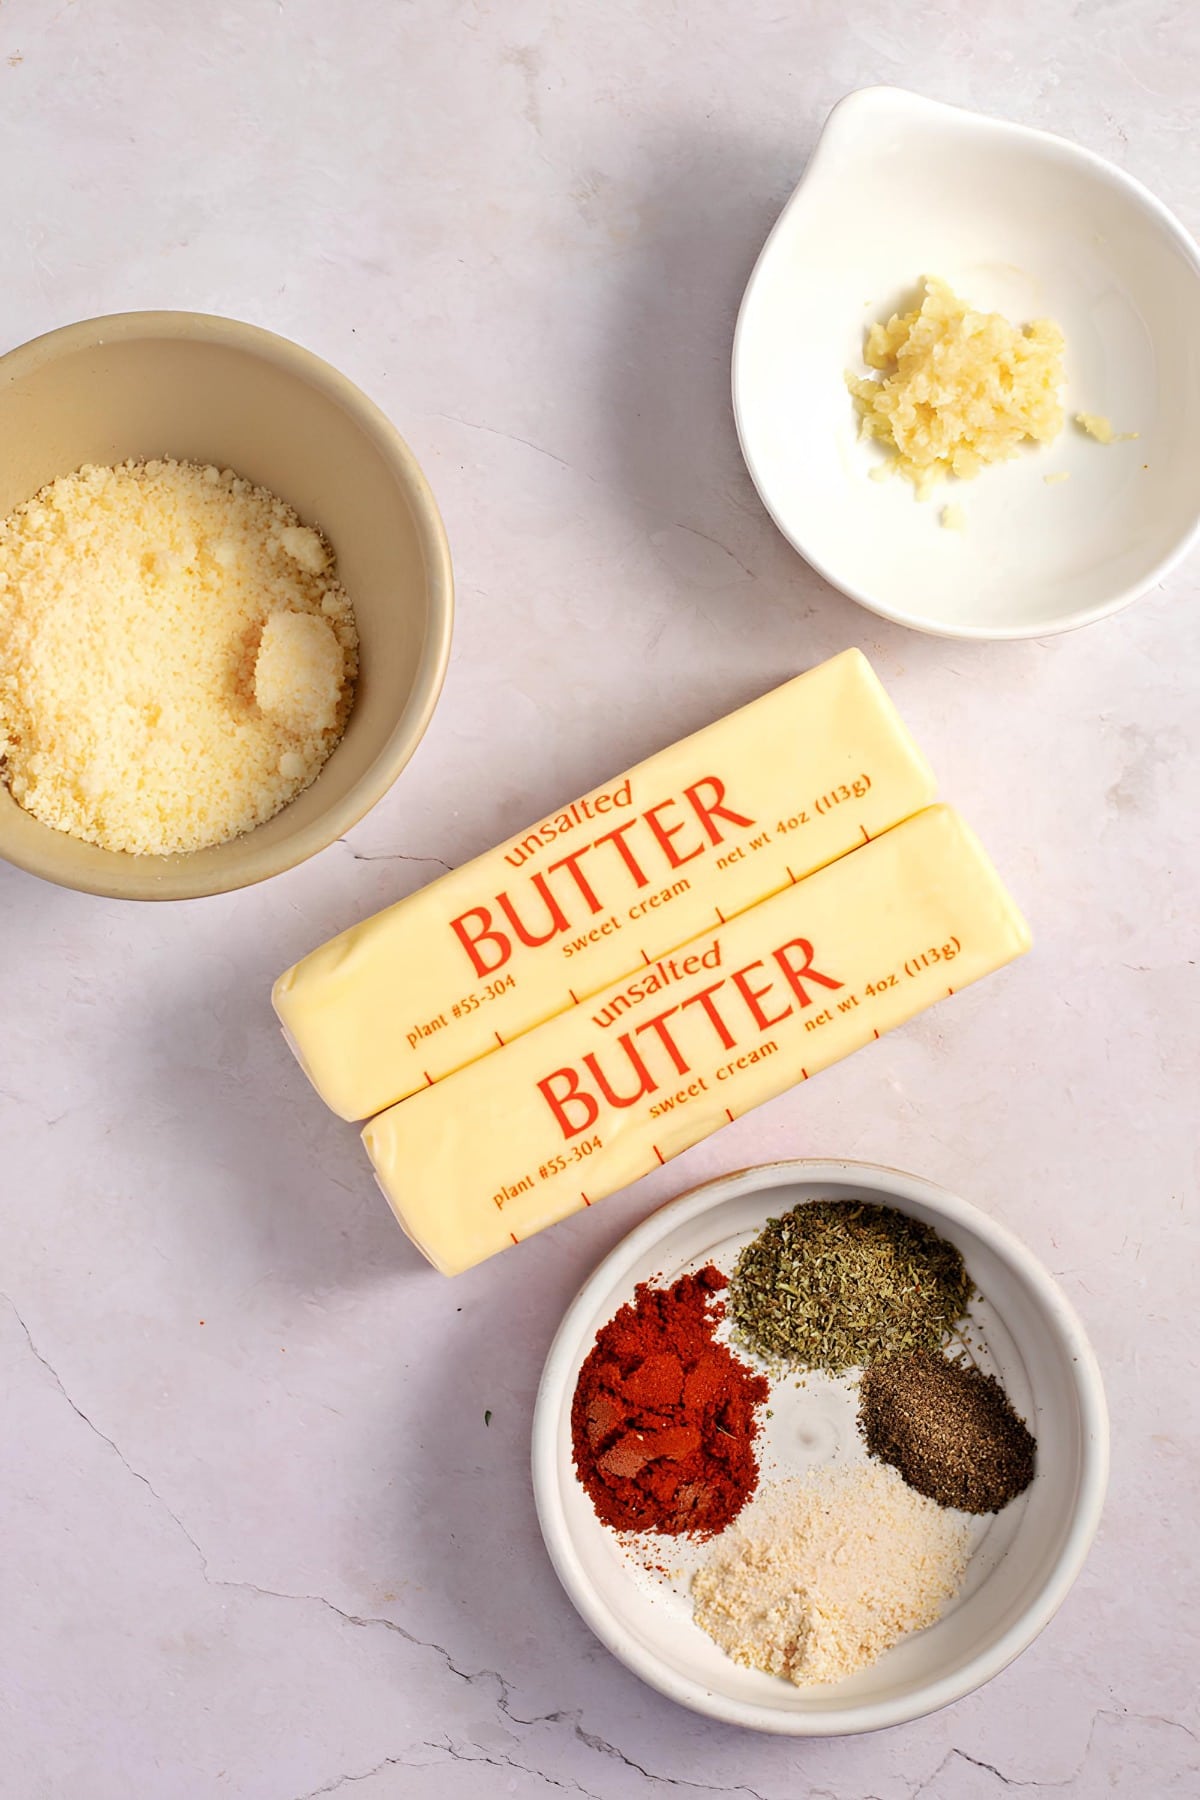 Garlic Butter Ingredients - Butter, Garlic, Parmesan Cheese, Seasonings and Spices